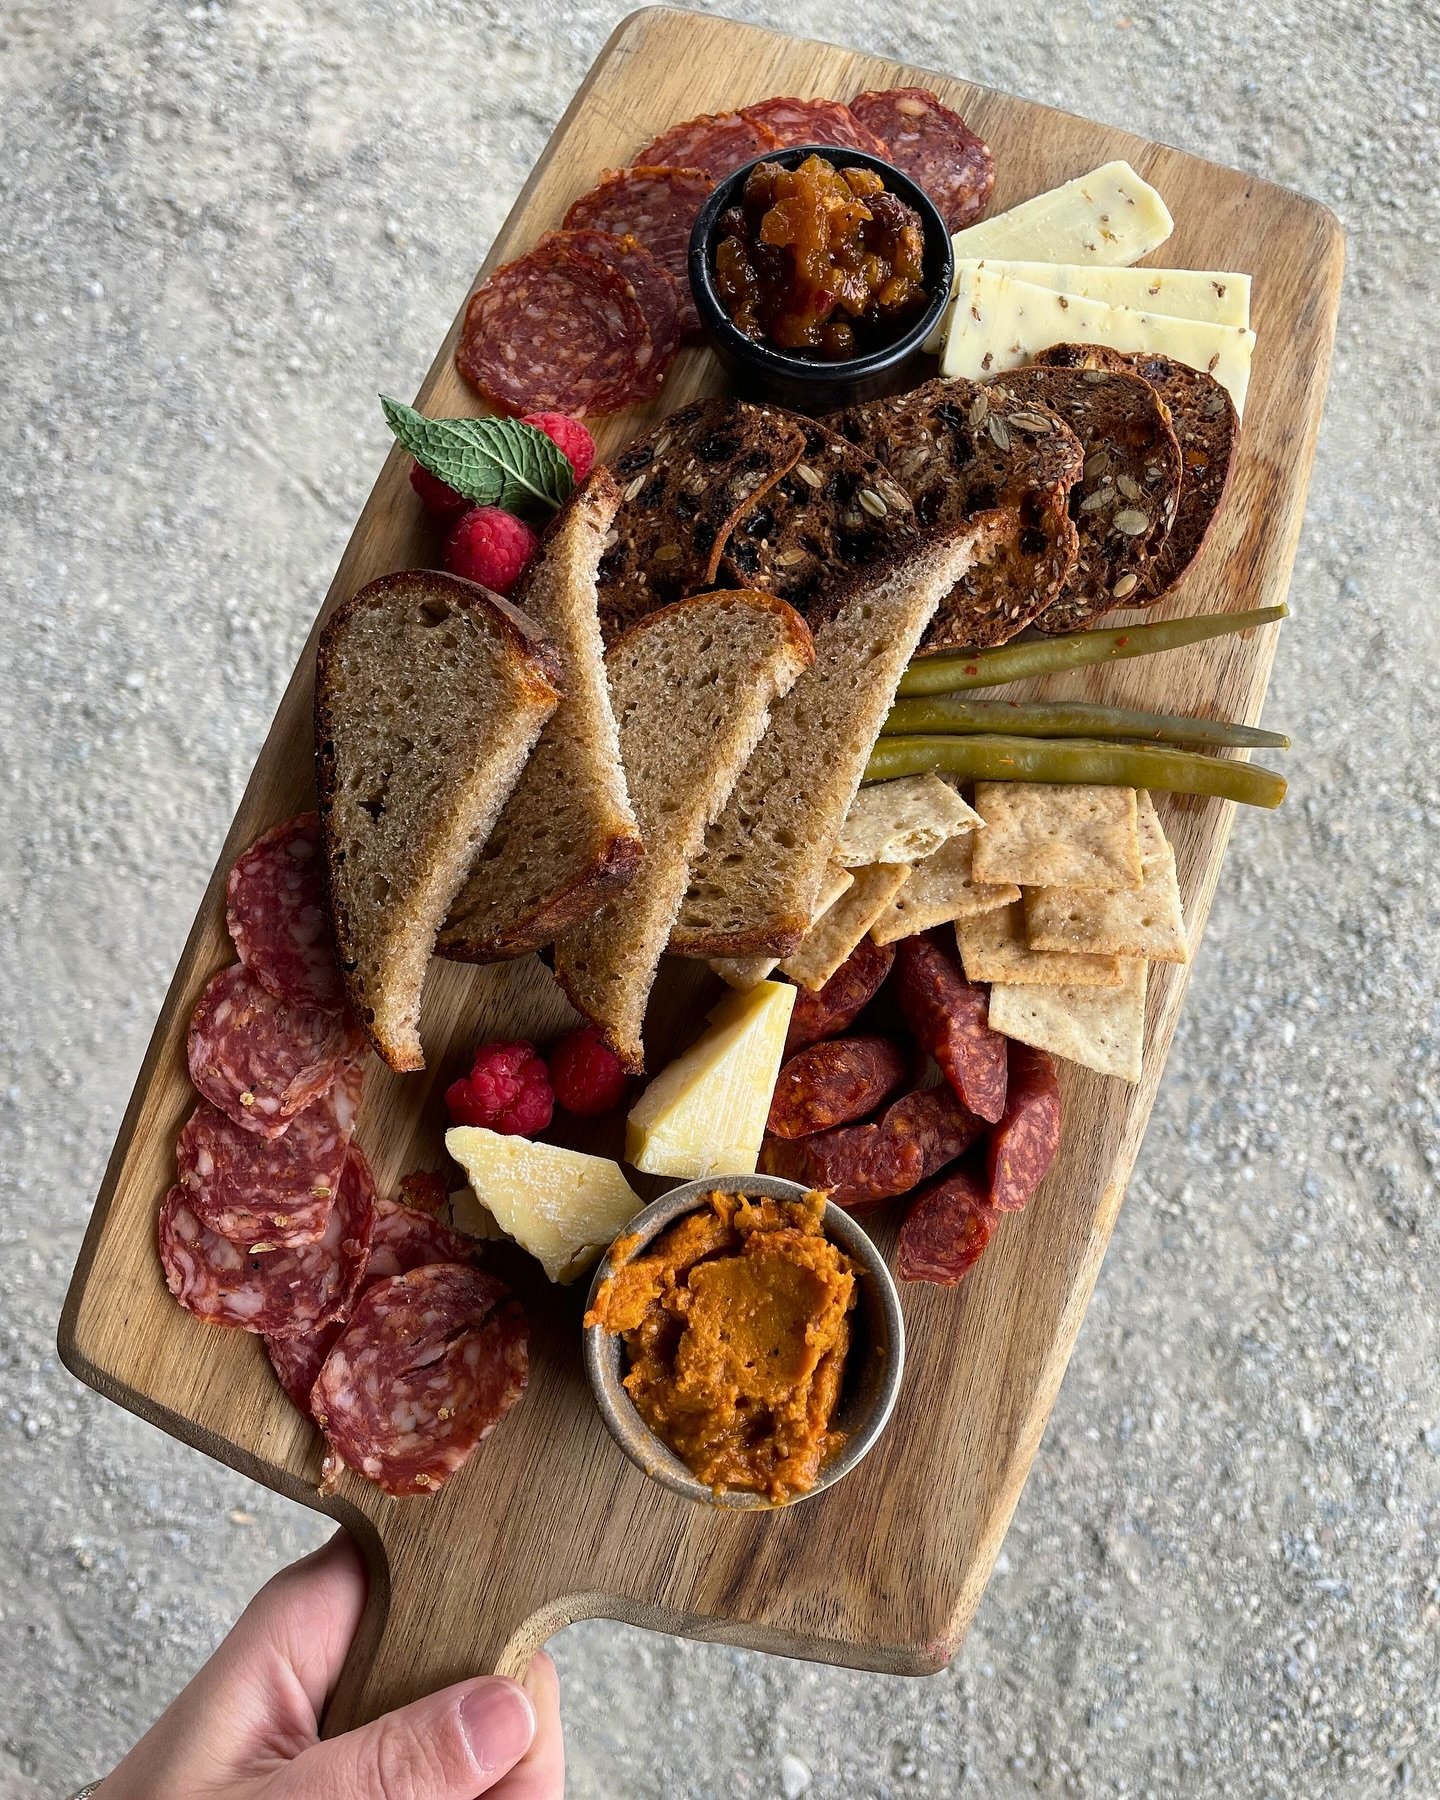 You know what goes great with wine? Charcuterie! 

Our charcuterie board is fuly of local meats and cheeses, house-made preserves and spreads, delicous crackers and house-made bread!  It&rsquo;s the perfect thing to graze on while you&rsquo;re enjoyi